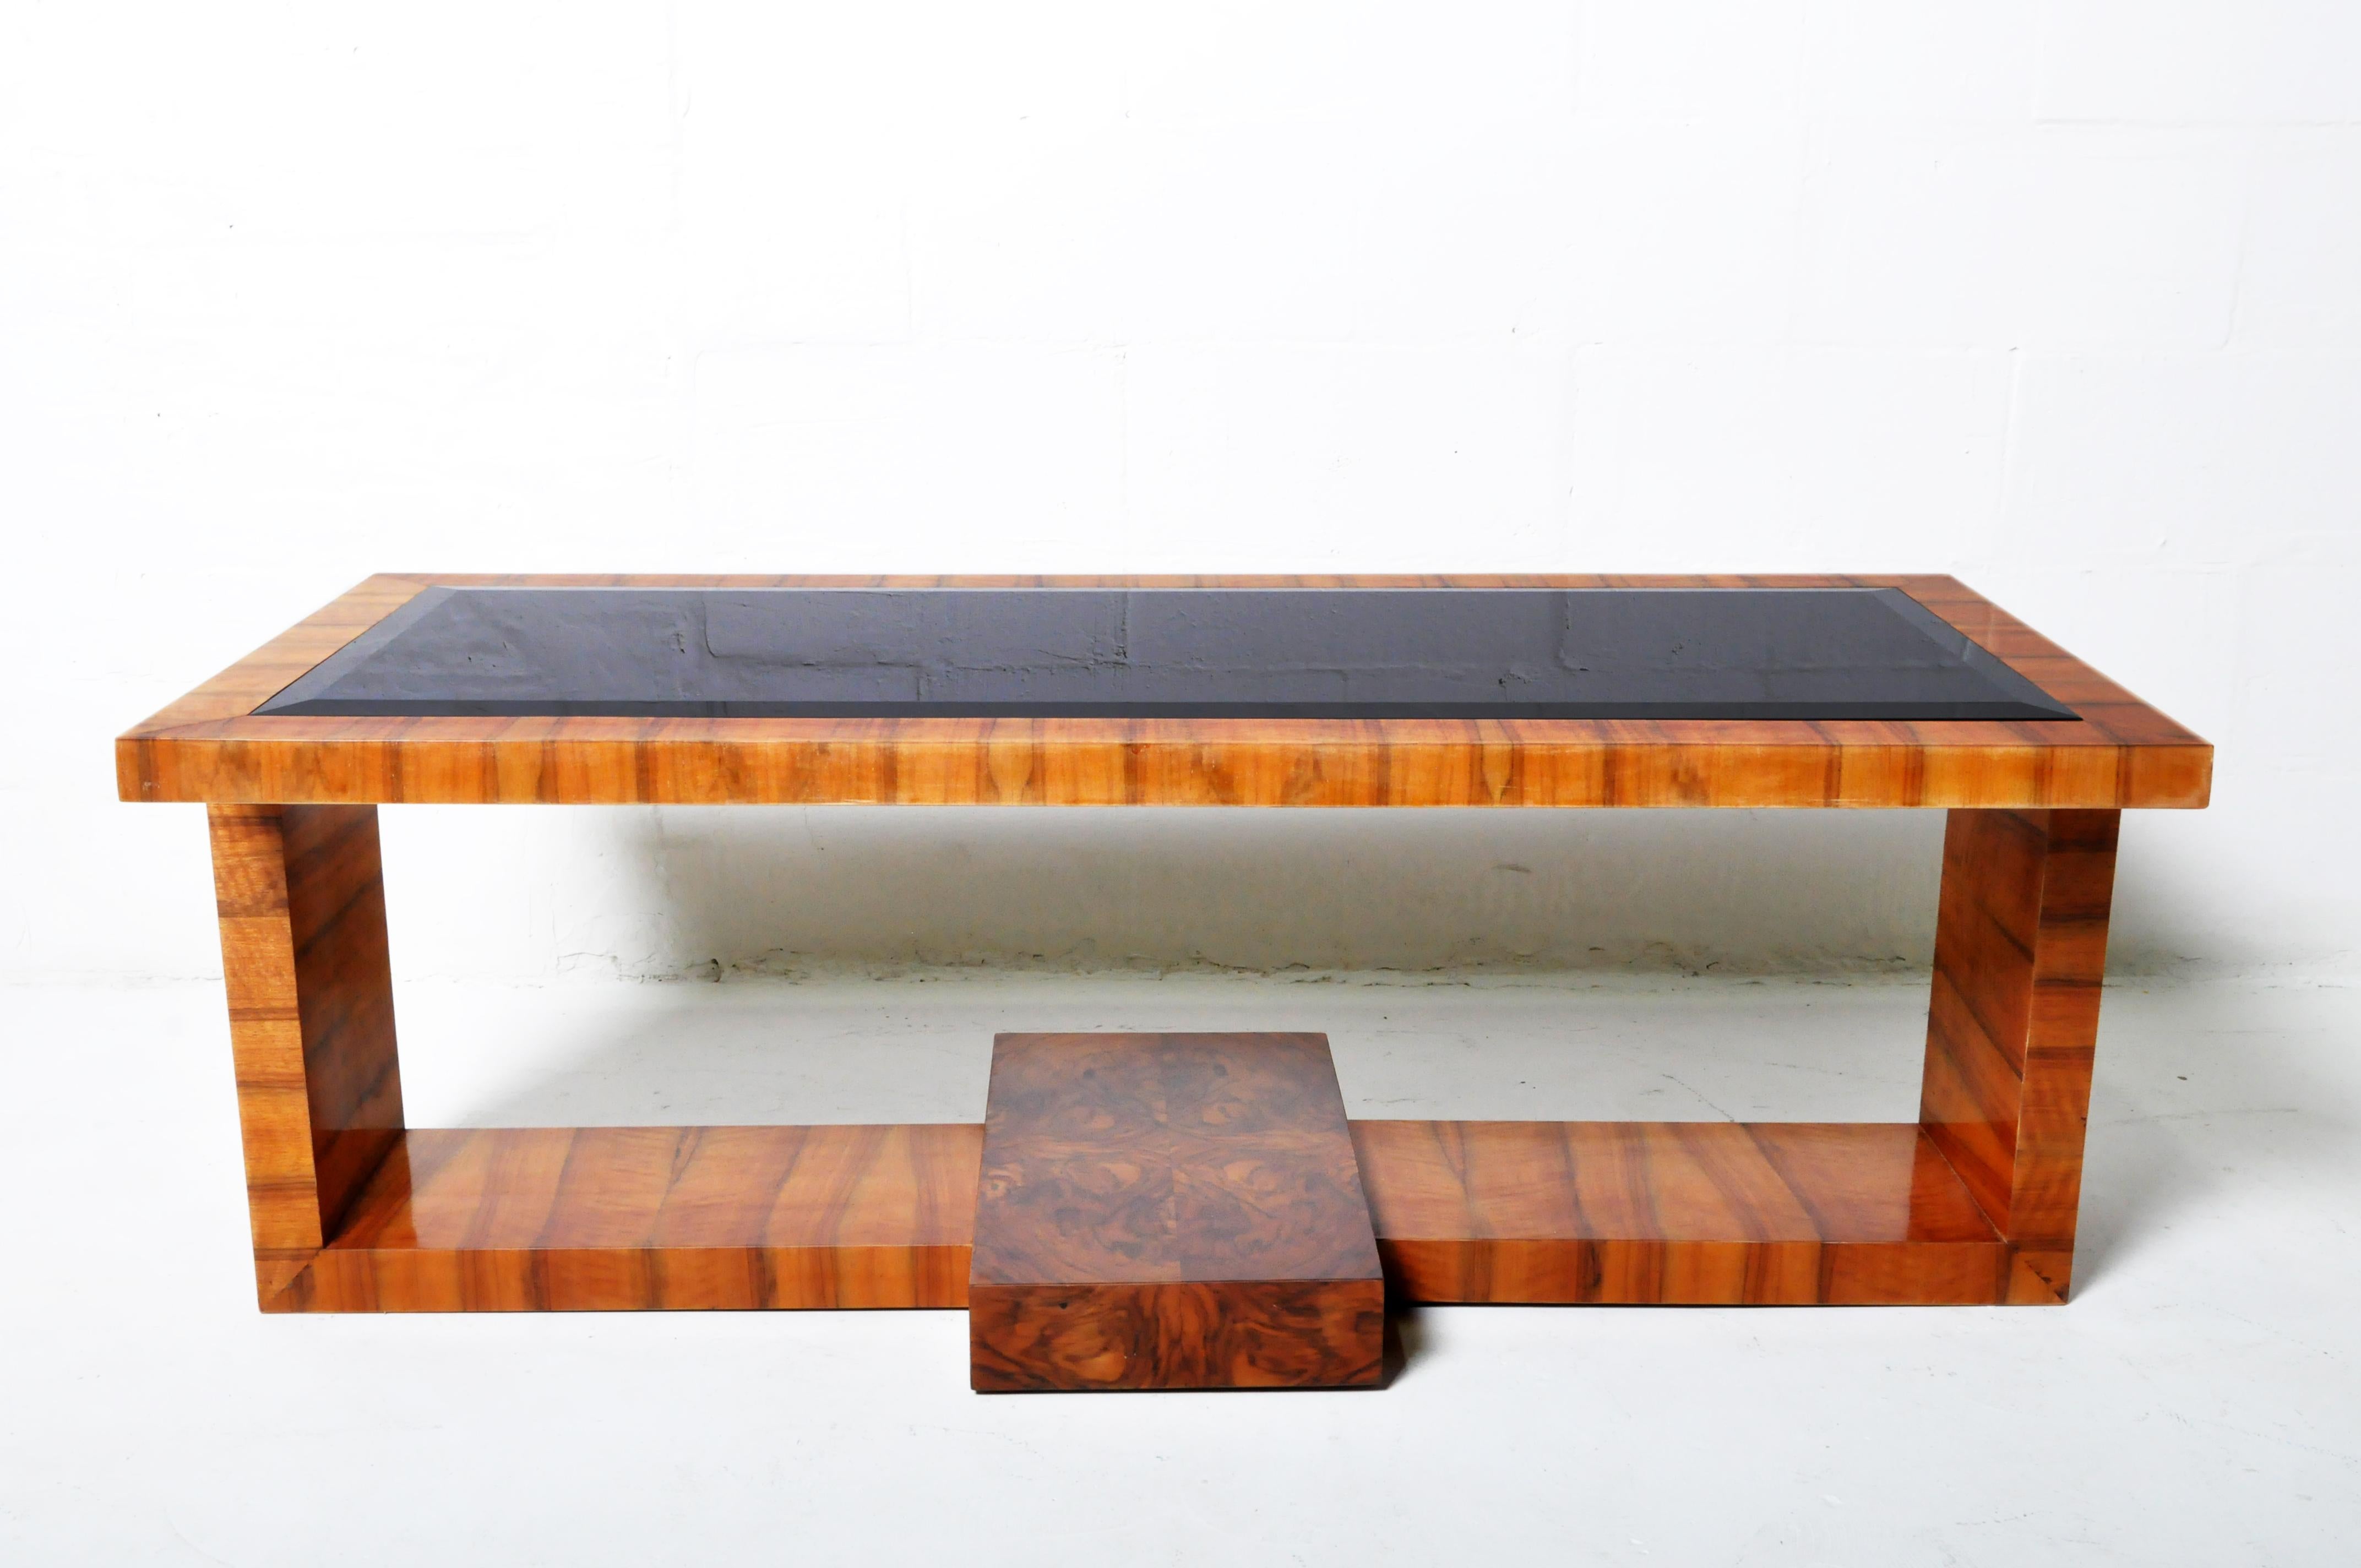 A modern French Art Deco-inspired coffee table in striking walnut veneer and with a smoked glass top.